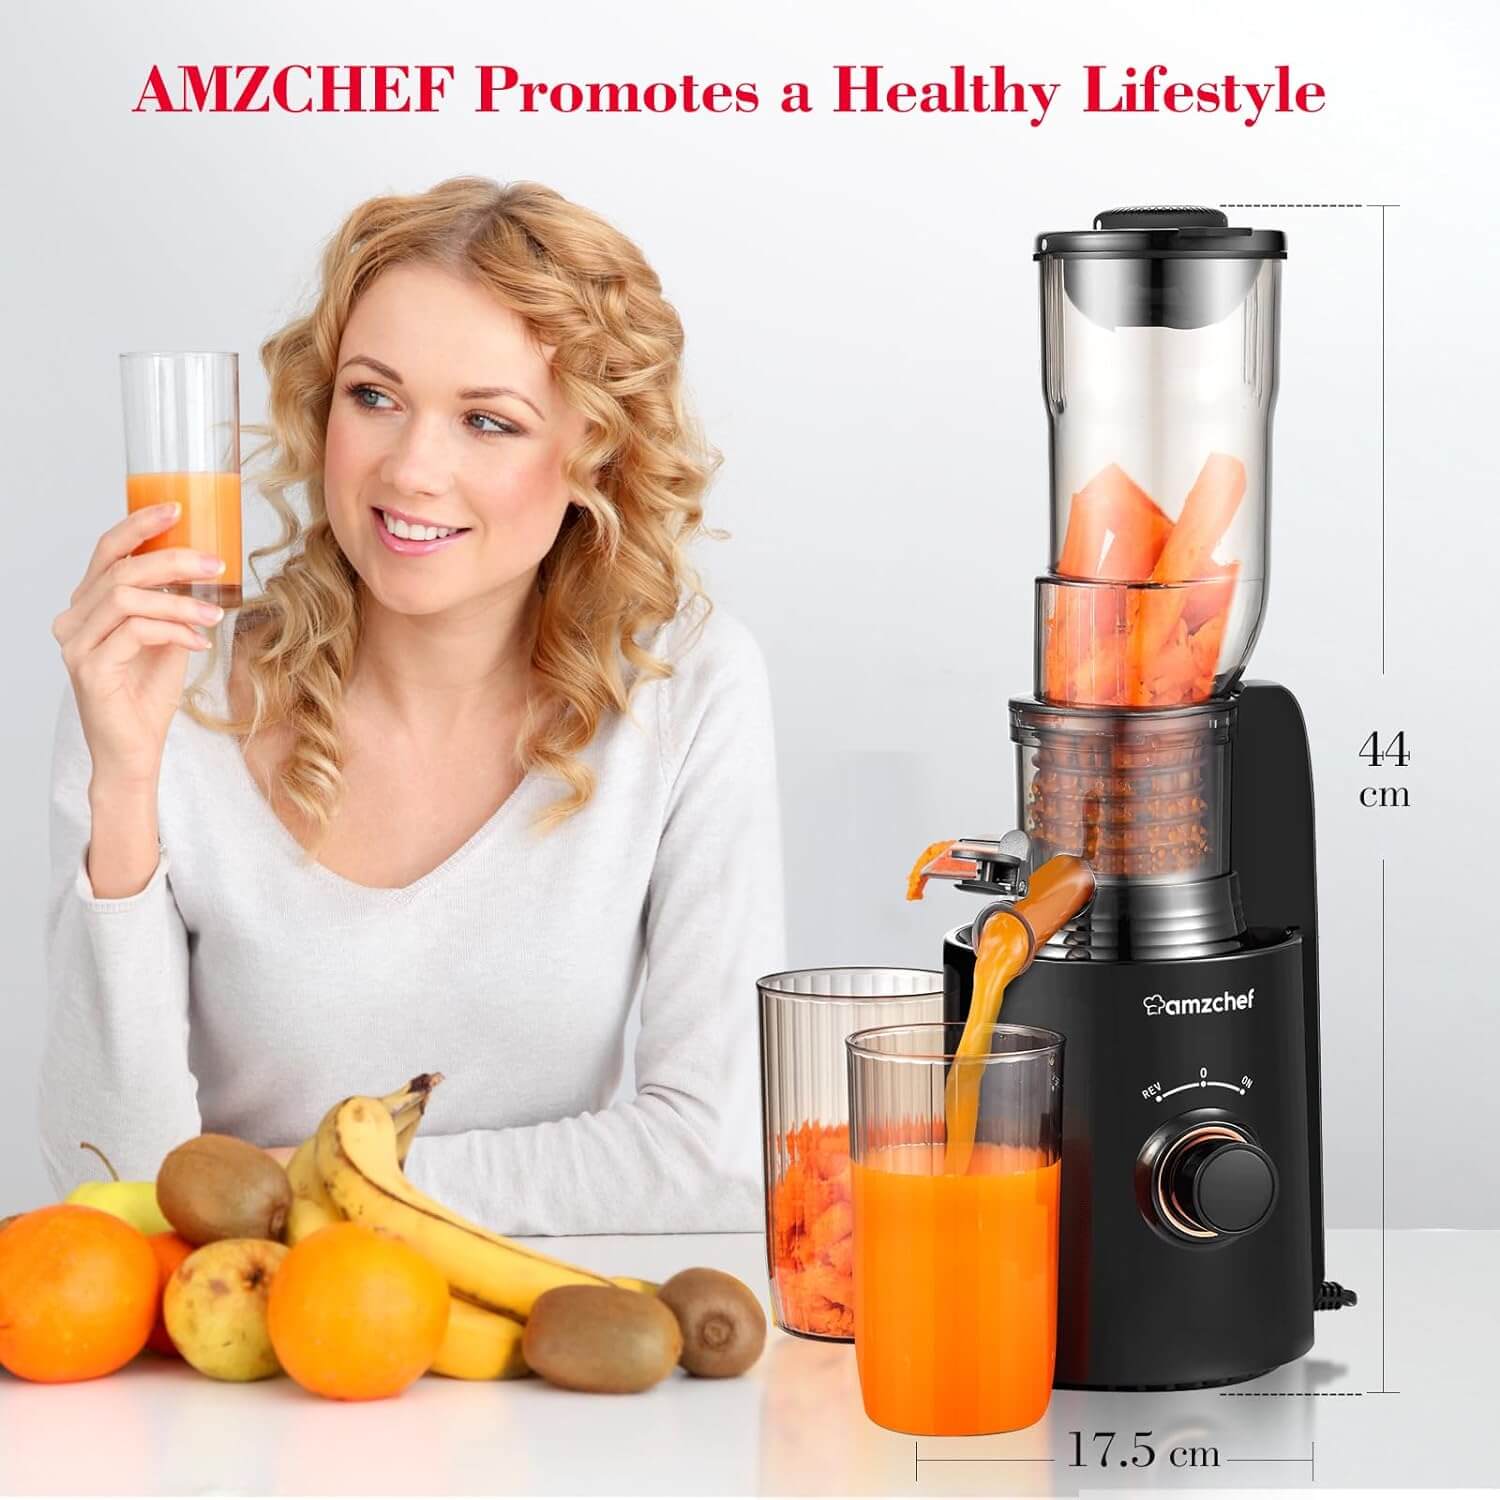 AMZCHEF Compact Slow Masticating Juicer 3" Wide Chute Black